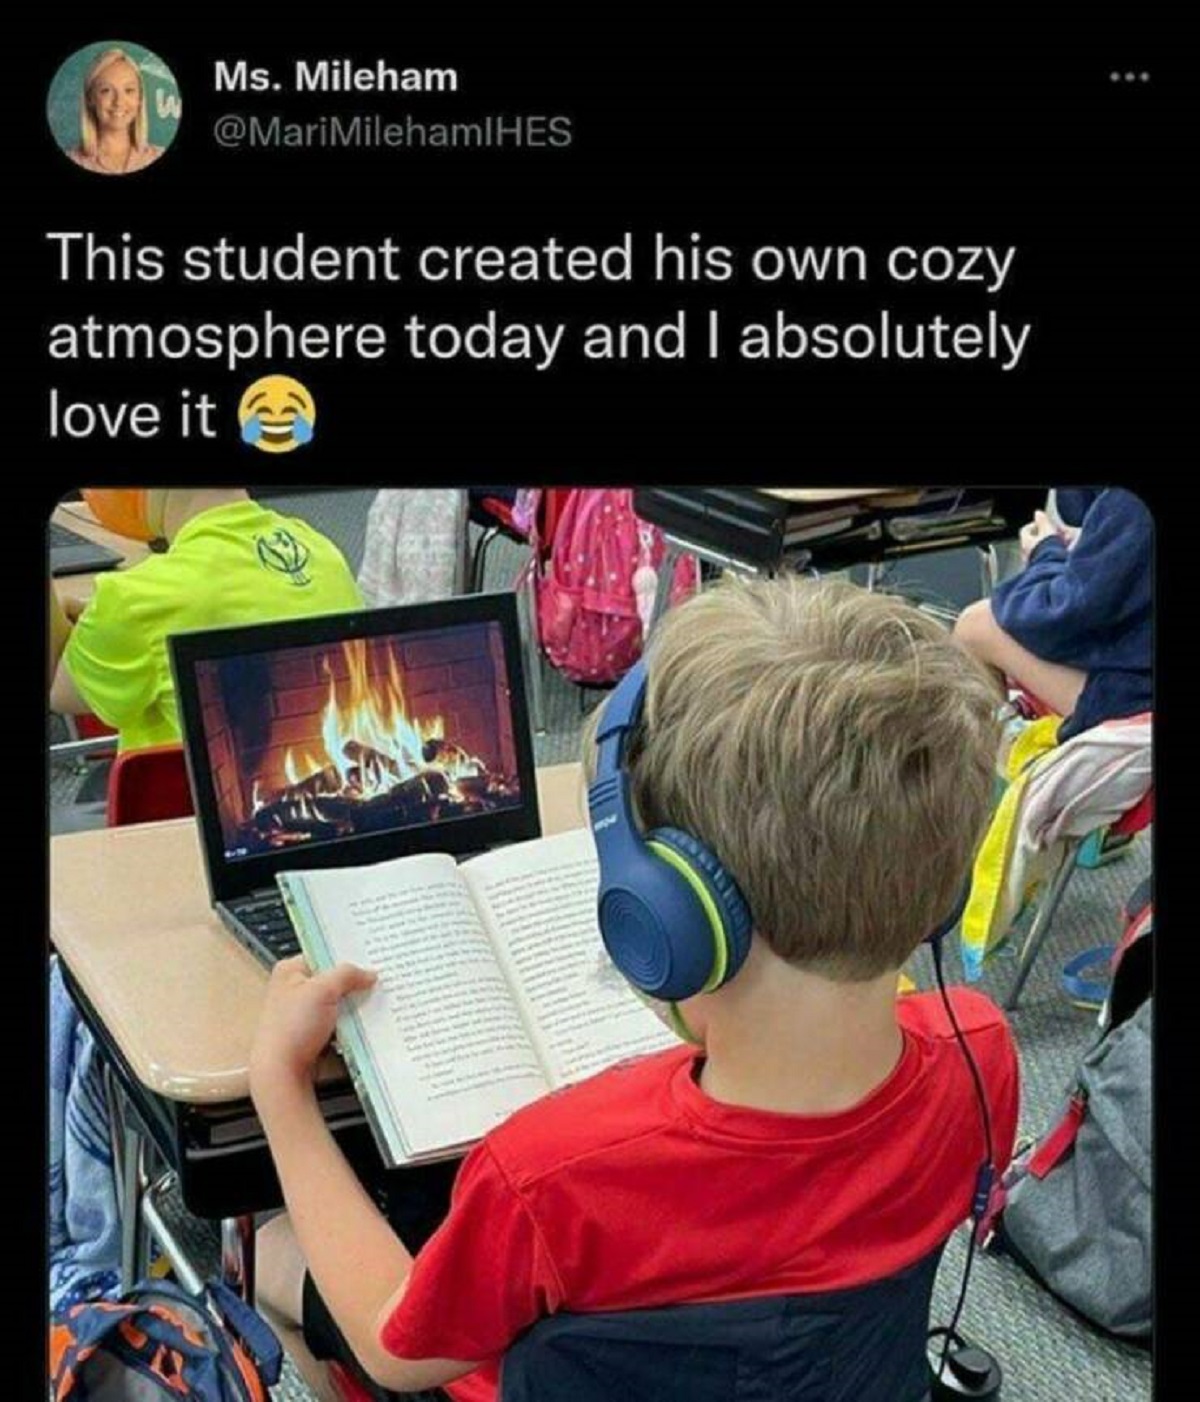 meme kid fireplace laptop reading - Ms. Mileham This student created his own cozy atmosphere today and I absolutely love it